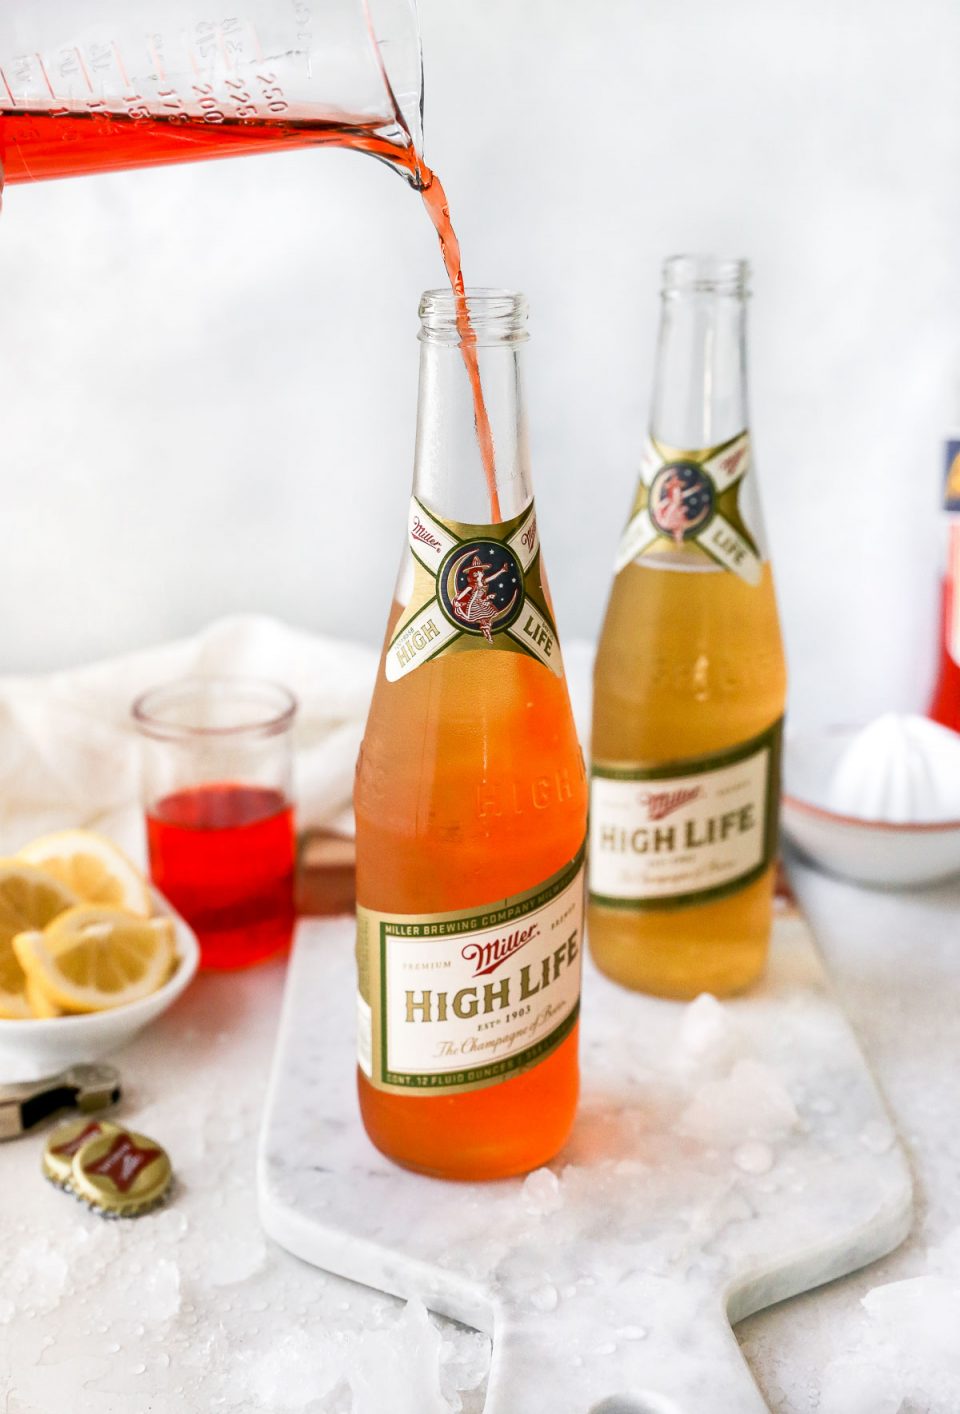 Pouring Aperol liqueur into a Miller High Life bottle to make a Spaghett cocktail. The bottles are on a white surface, next to lemon wedges, a bottle opener & a bottle of Aperol liqueur.